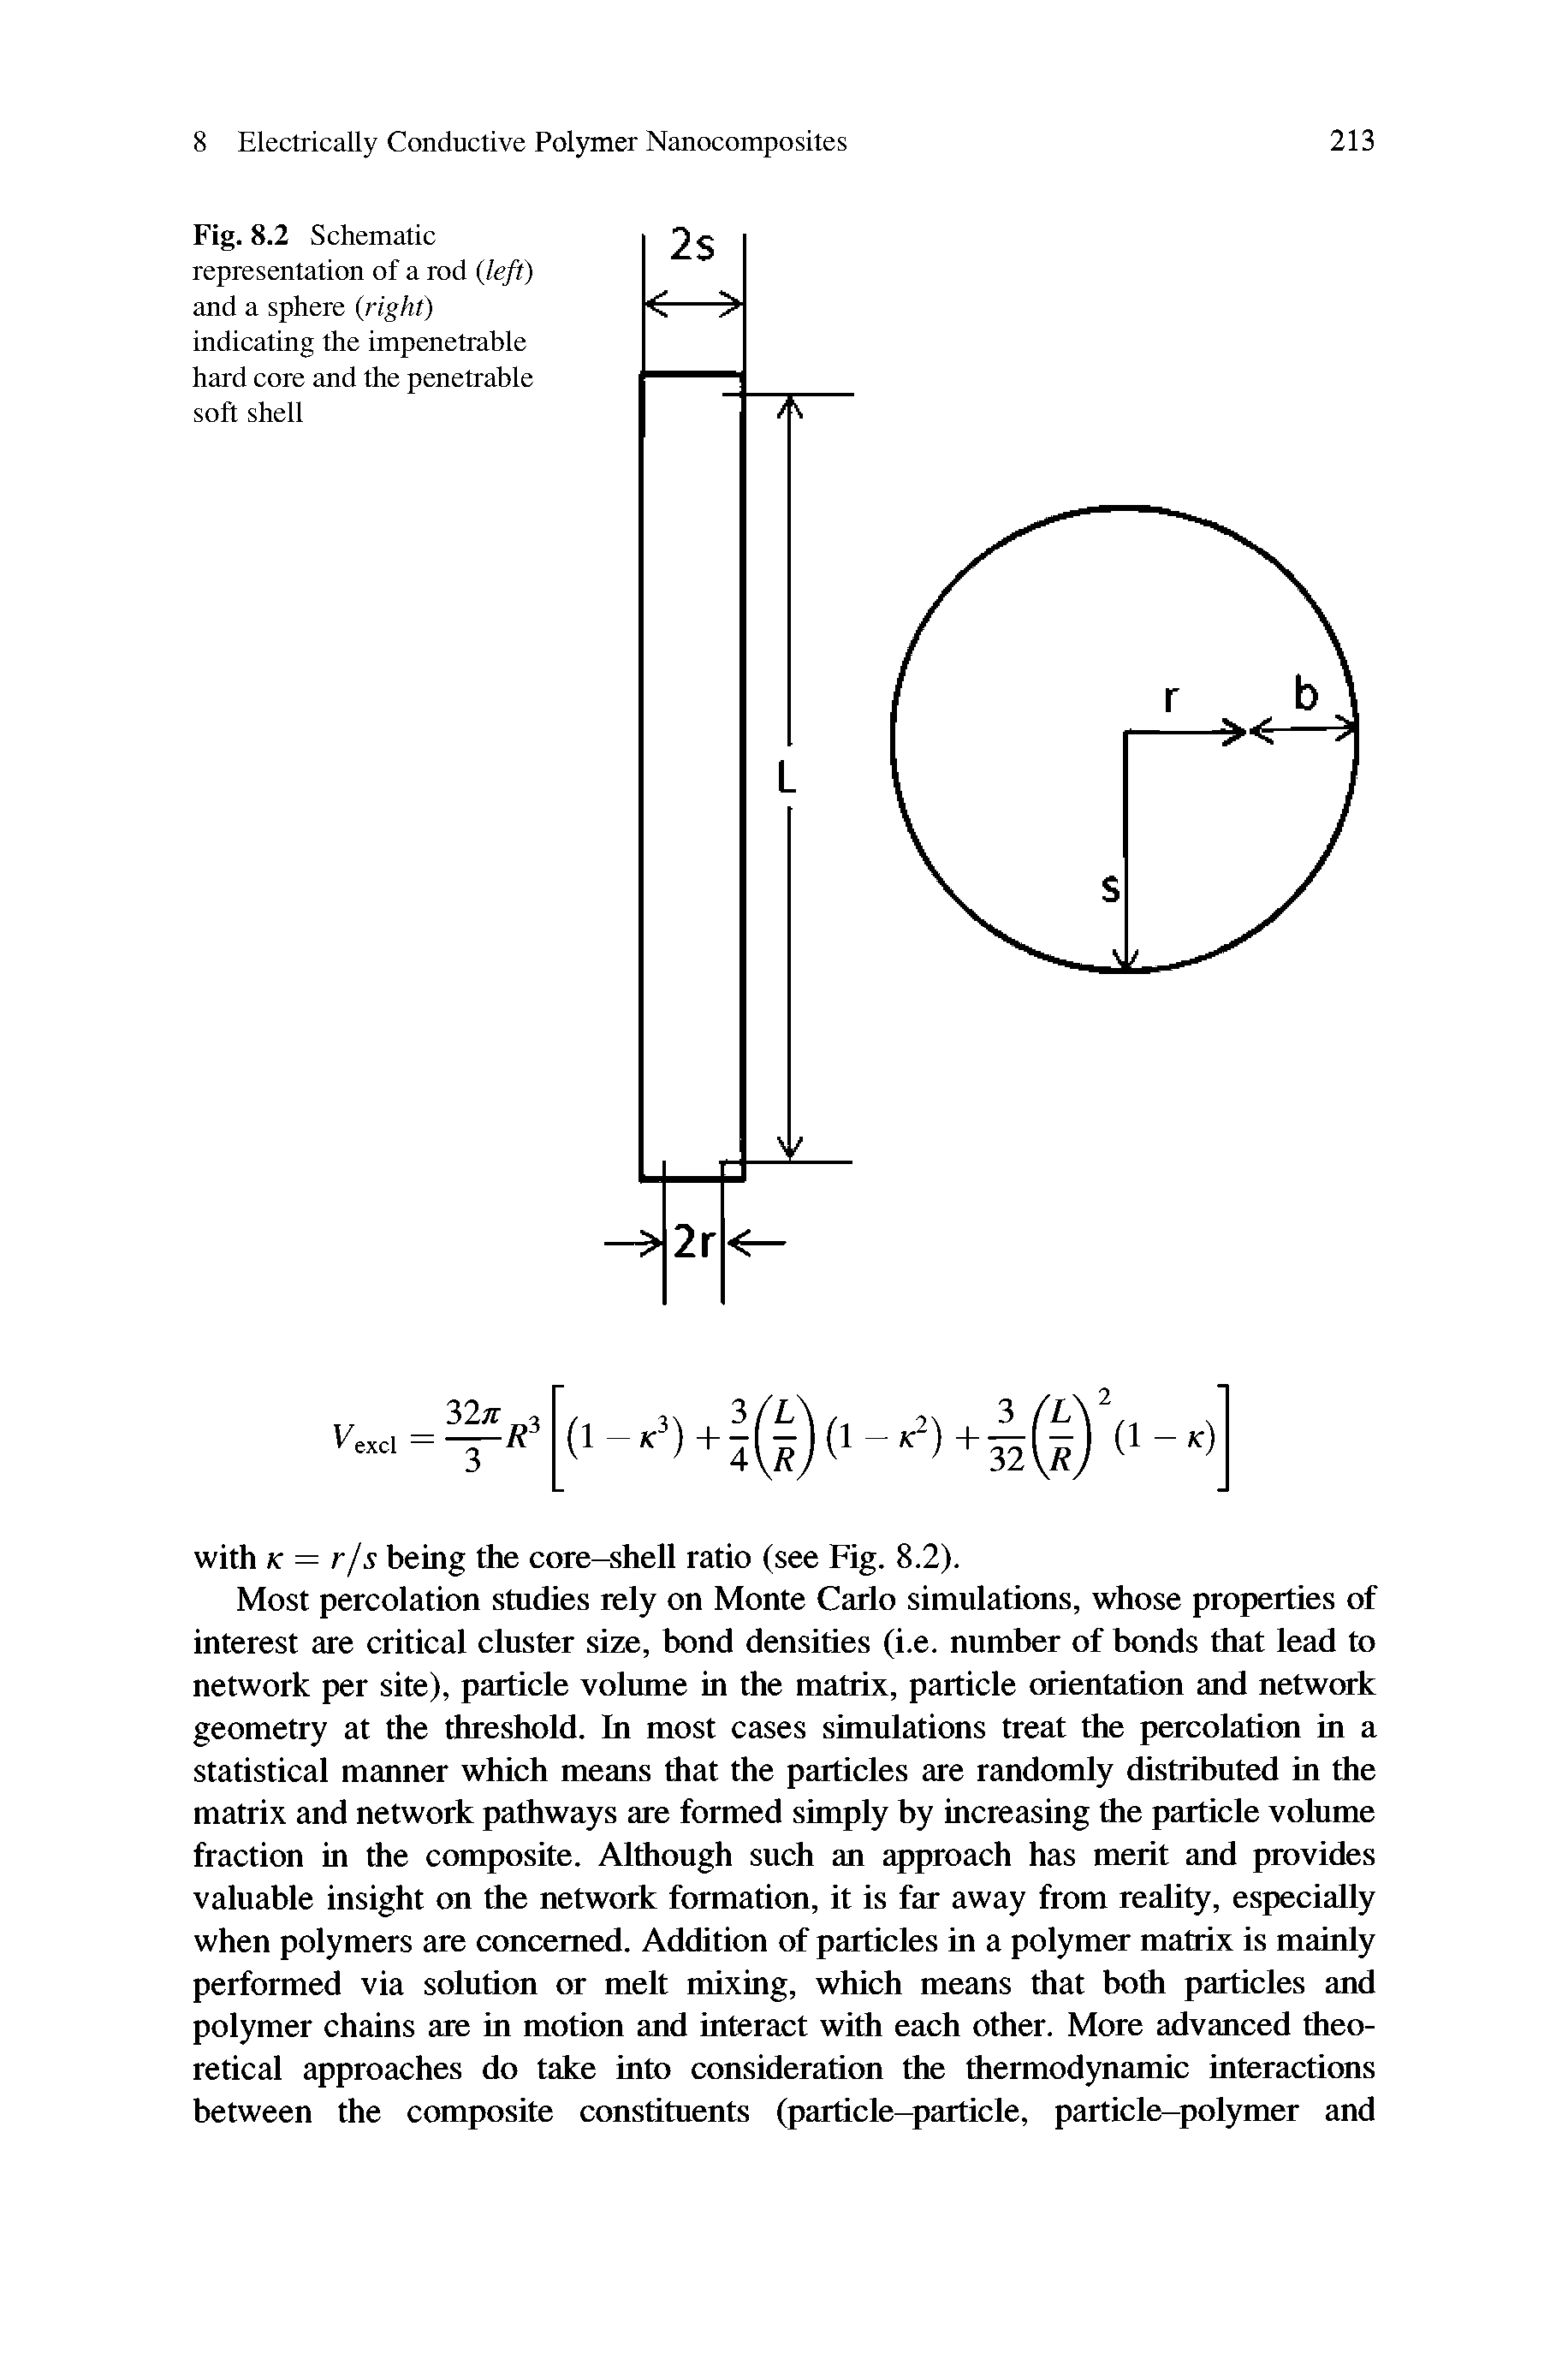 Fig. 8.2 Schematic representation of a rod (left) and a sphere (right) indicating the impenetrable hard core and the penetrable soft shell...